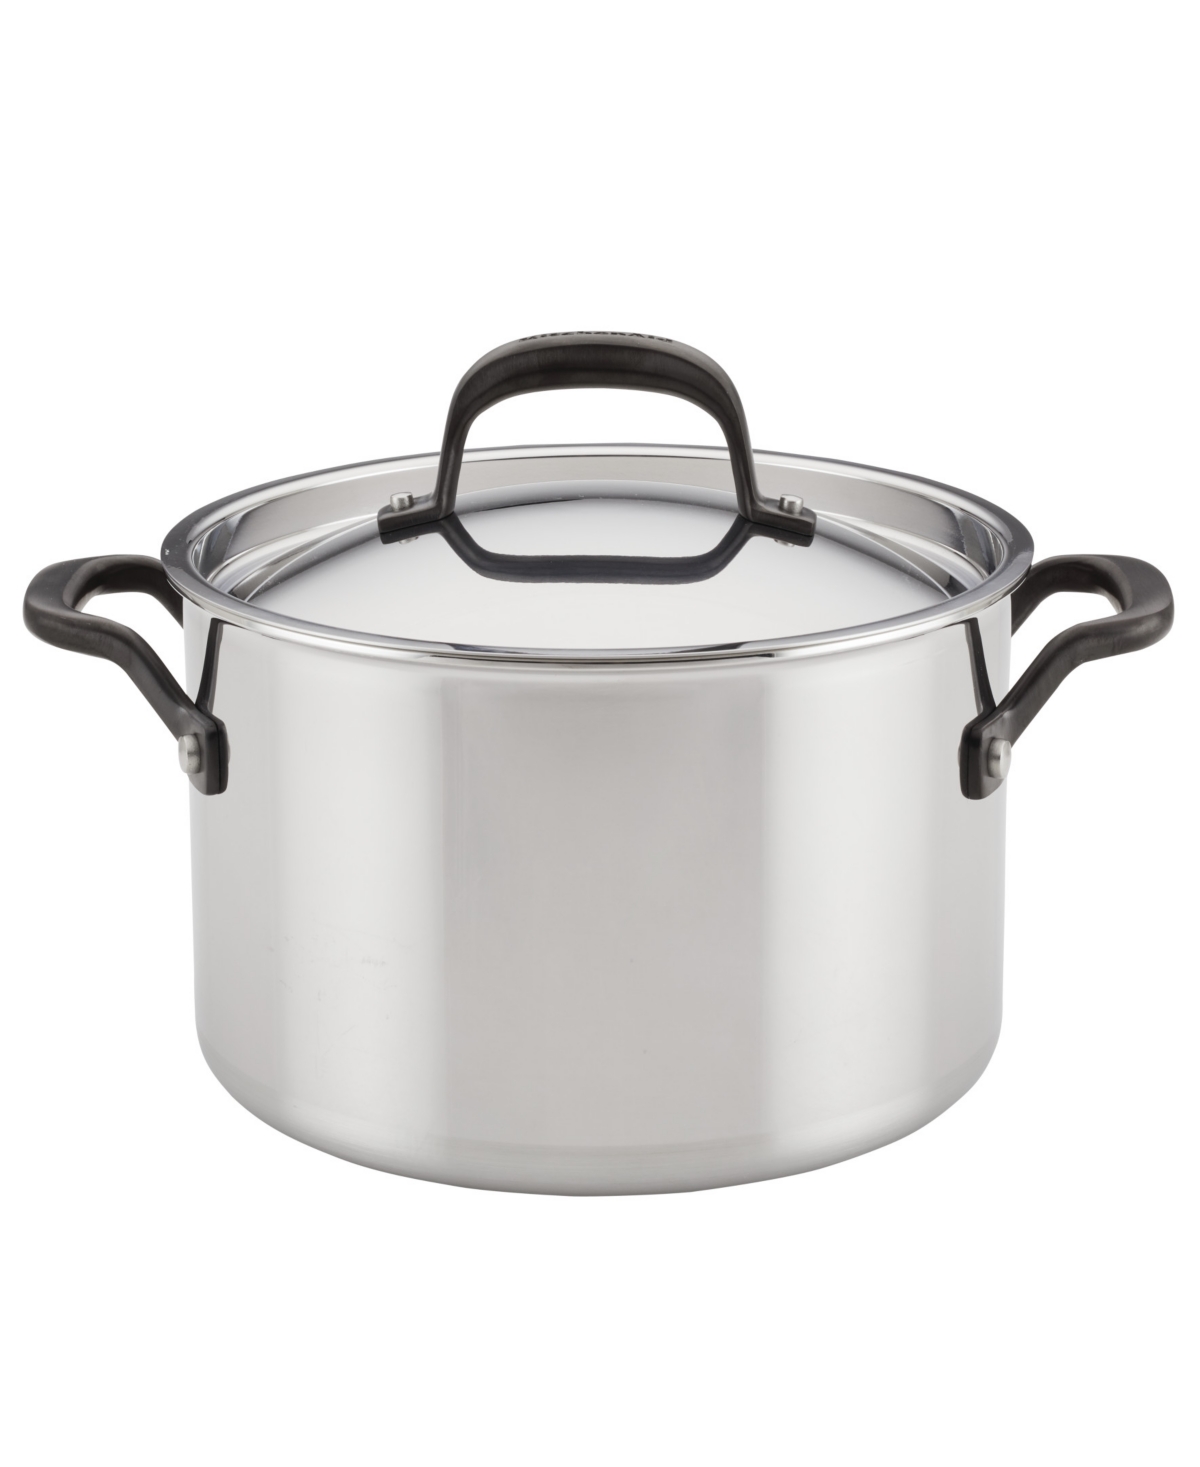 Kitchenaid 5-ply Clad Stainless Steel 6-quart Stockpot With Lid In Polished Stainless Steel